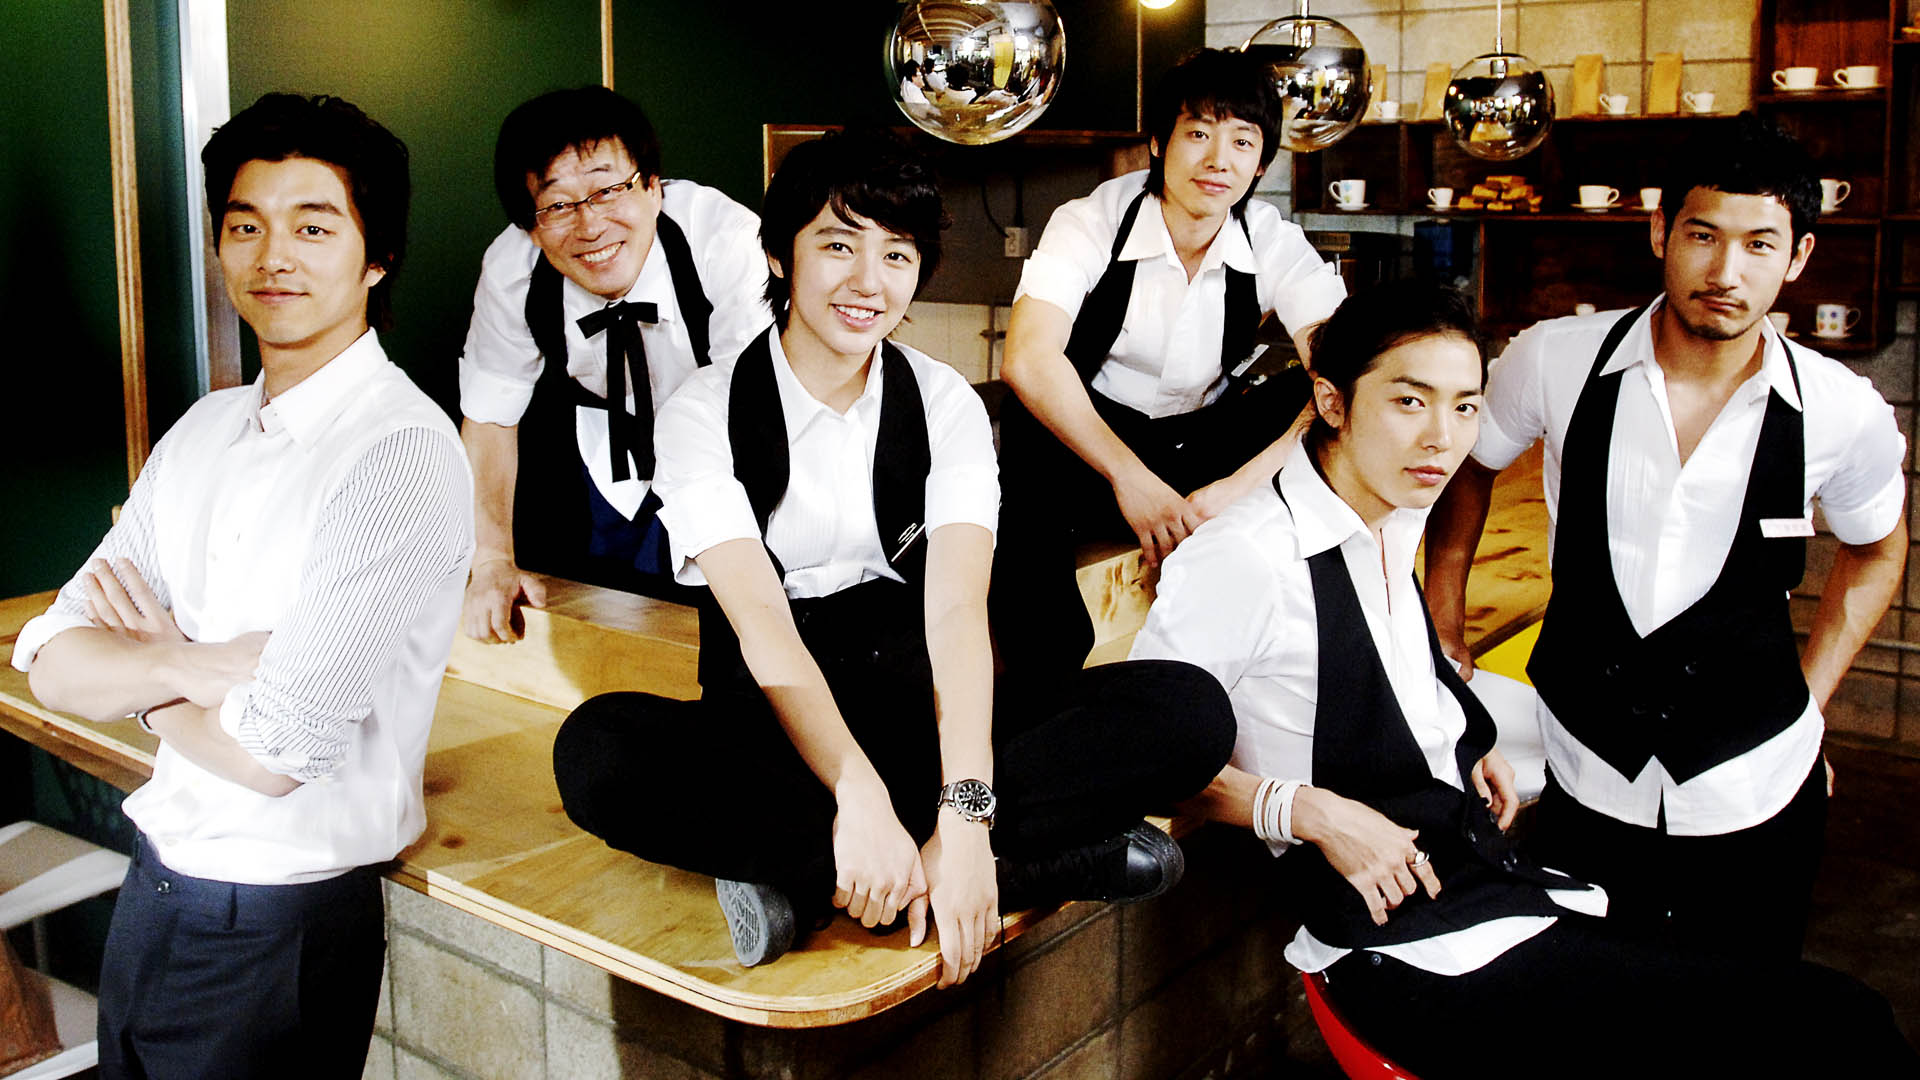 cast-of-coffee-prince-to-reunite-in-new-documentary-project-produced-by-mbc-3